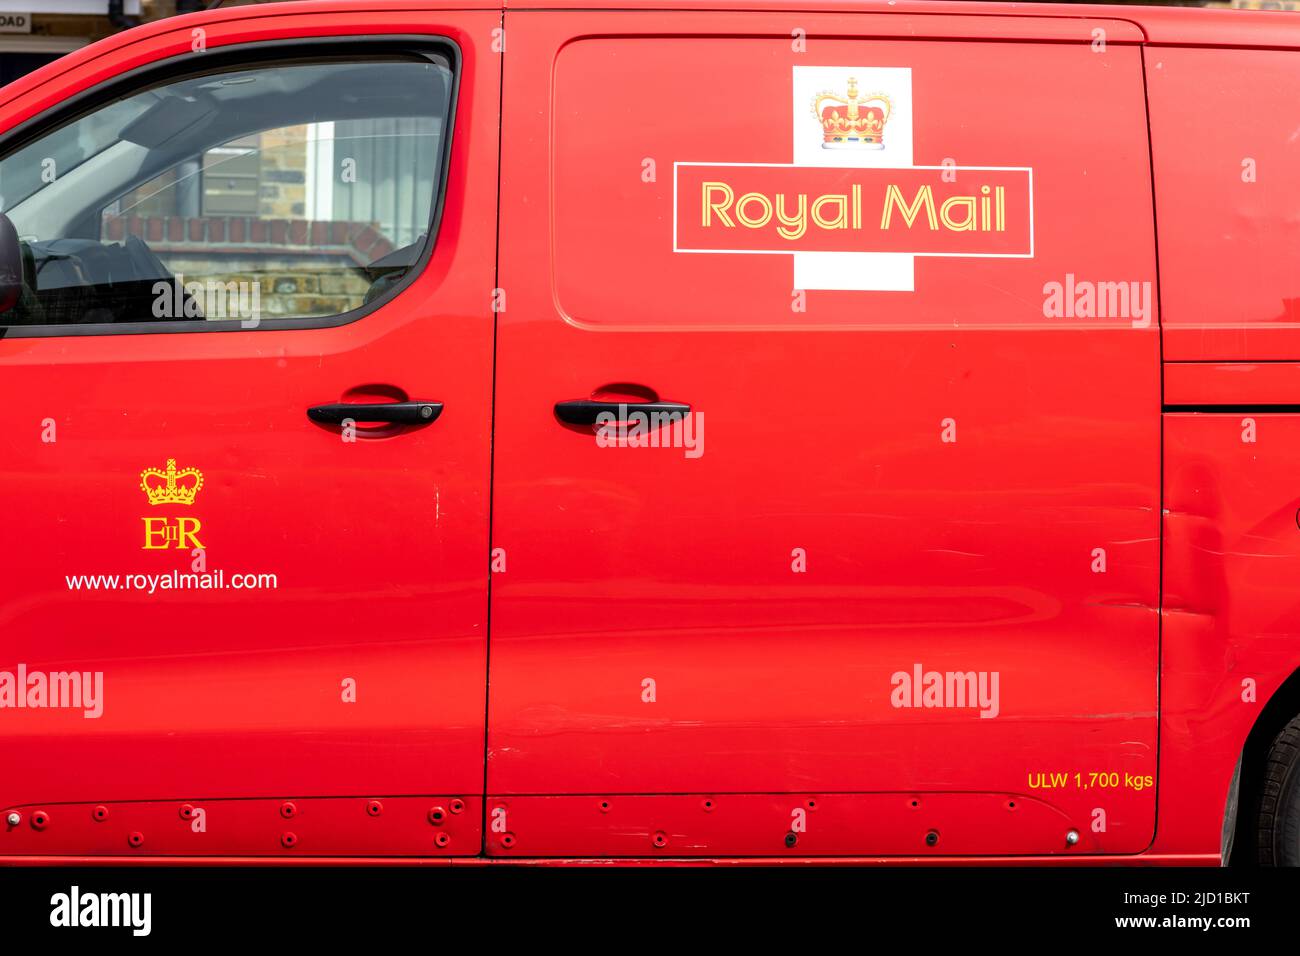 London. UK- 06.16.2022. The markings on the side of a Royal Mail delivery van showing the company's name and logo. Stock Photo